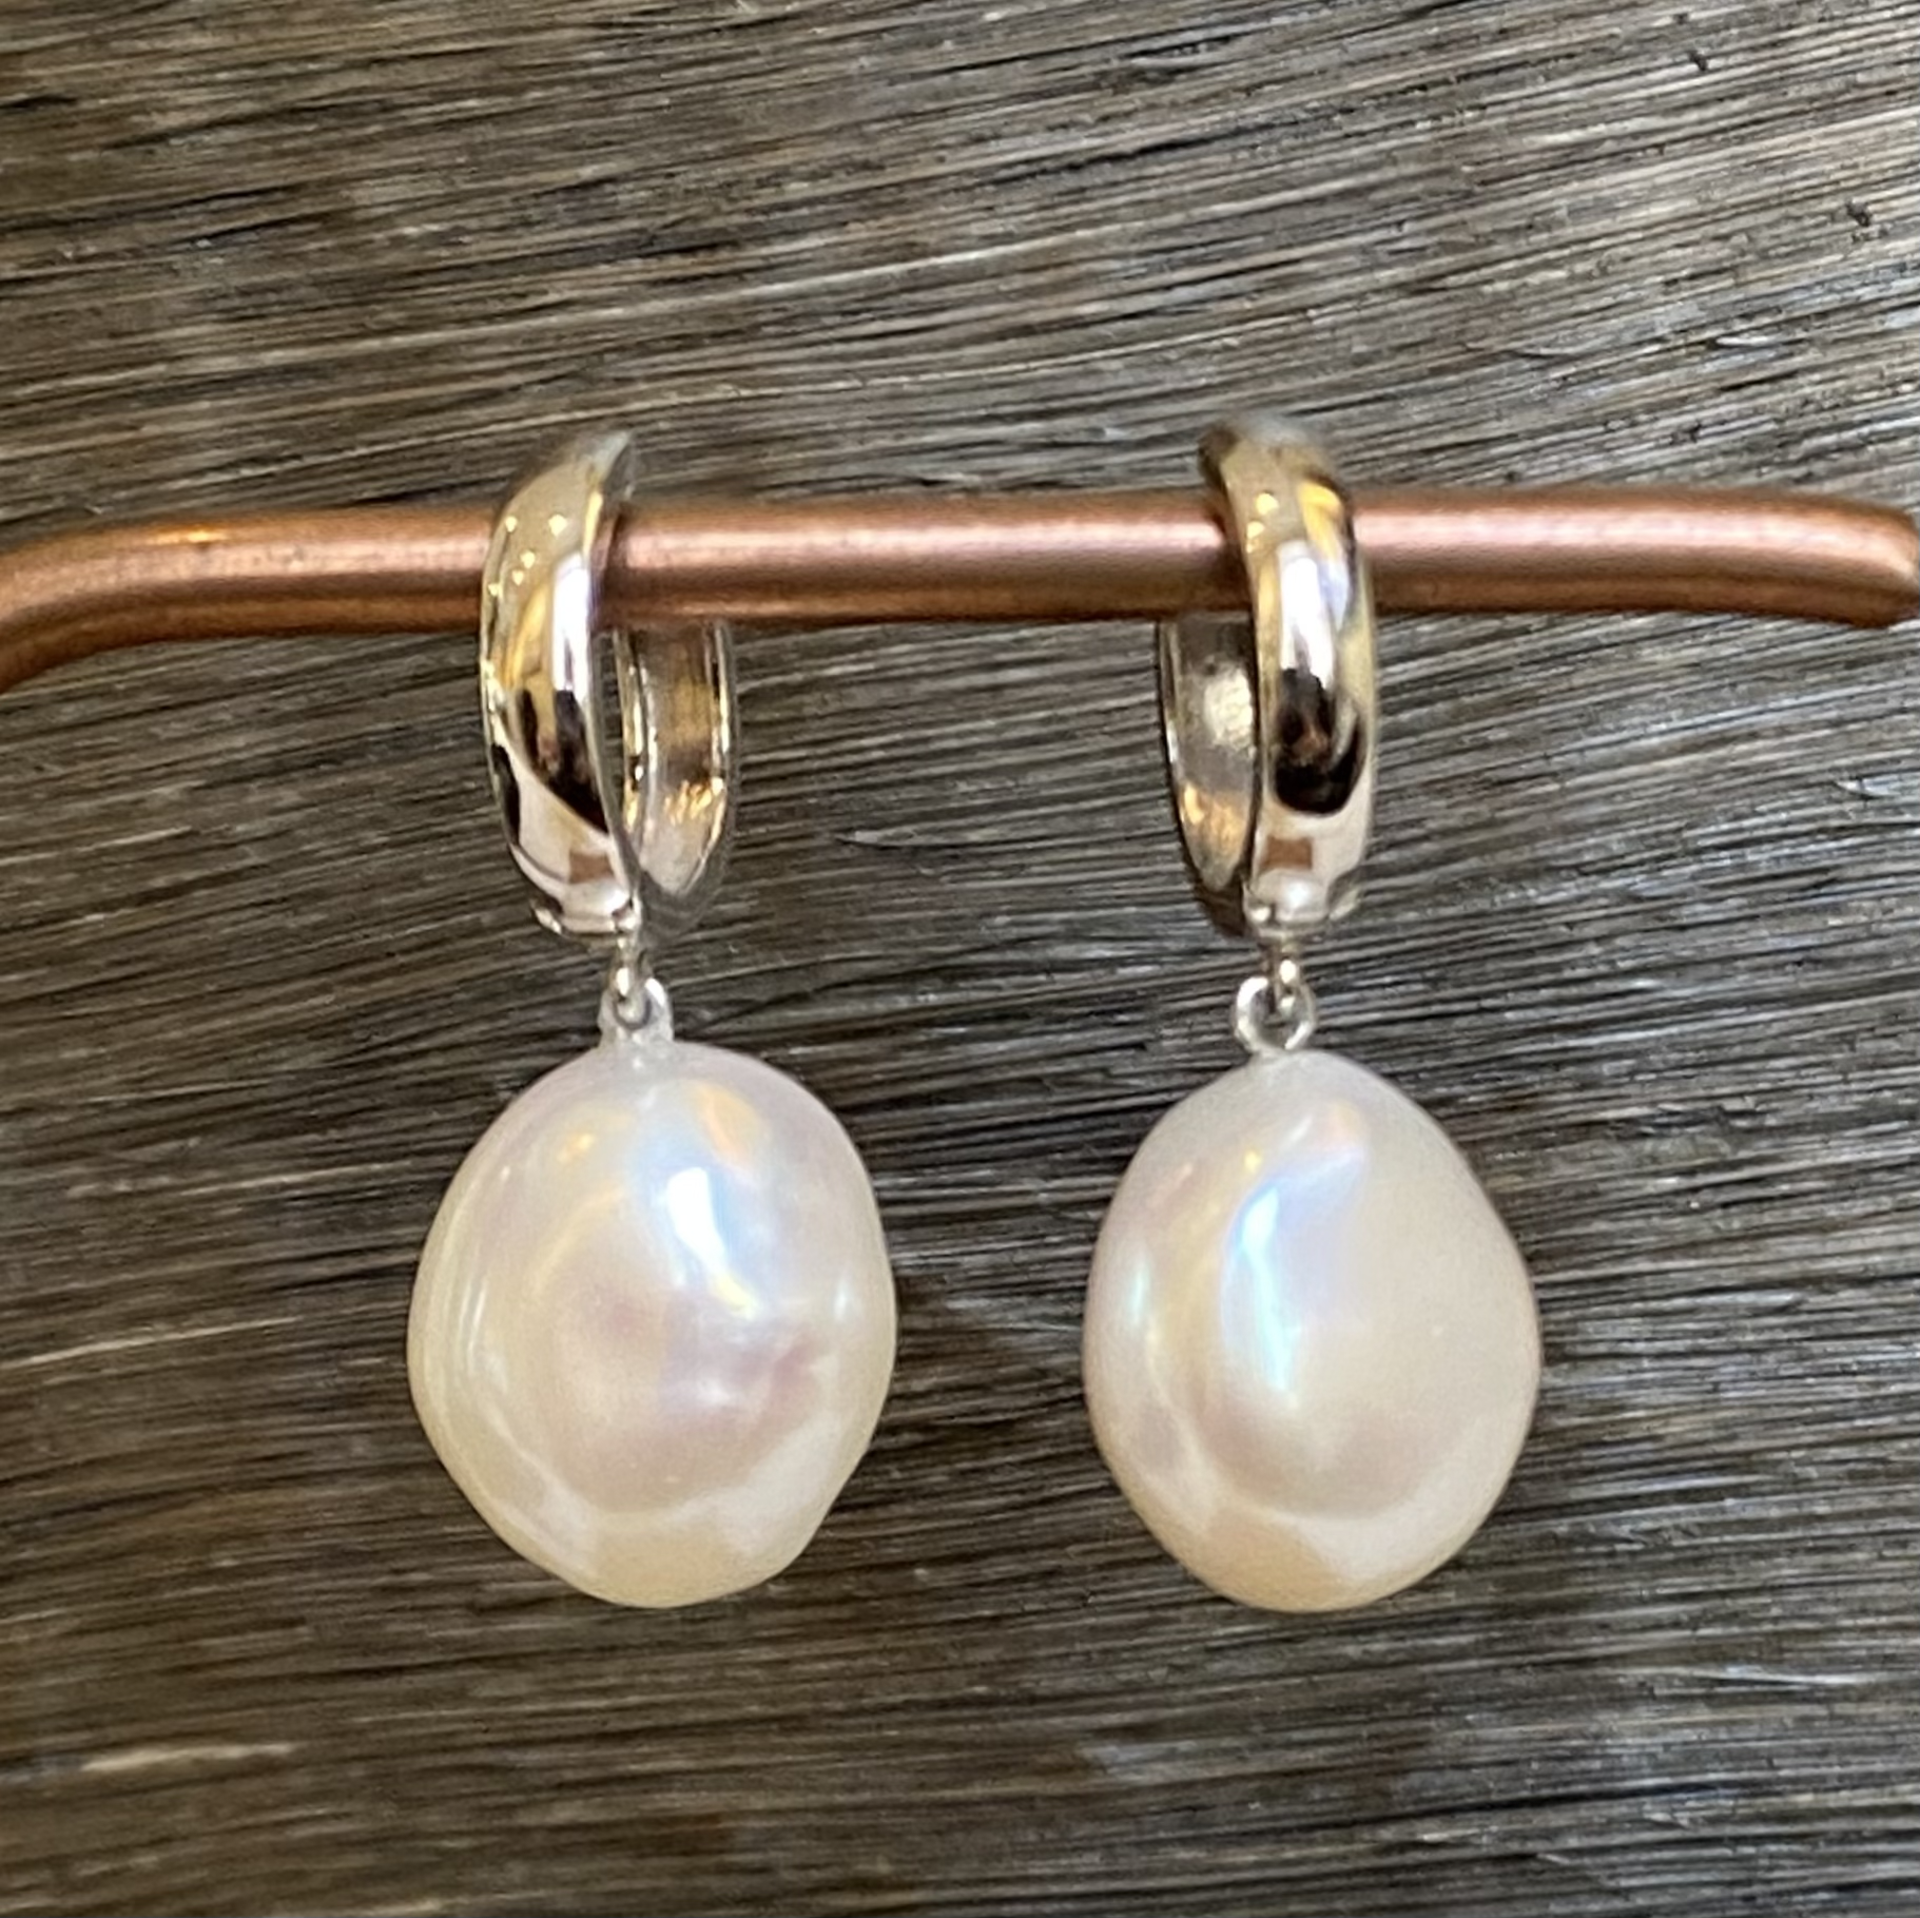 Baroque Drop Pearl Earring Cuffs by Sidney Soriano